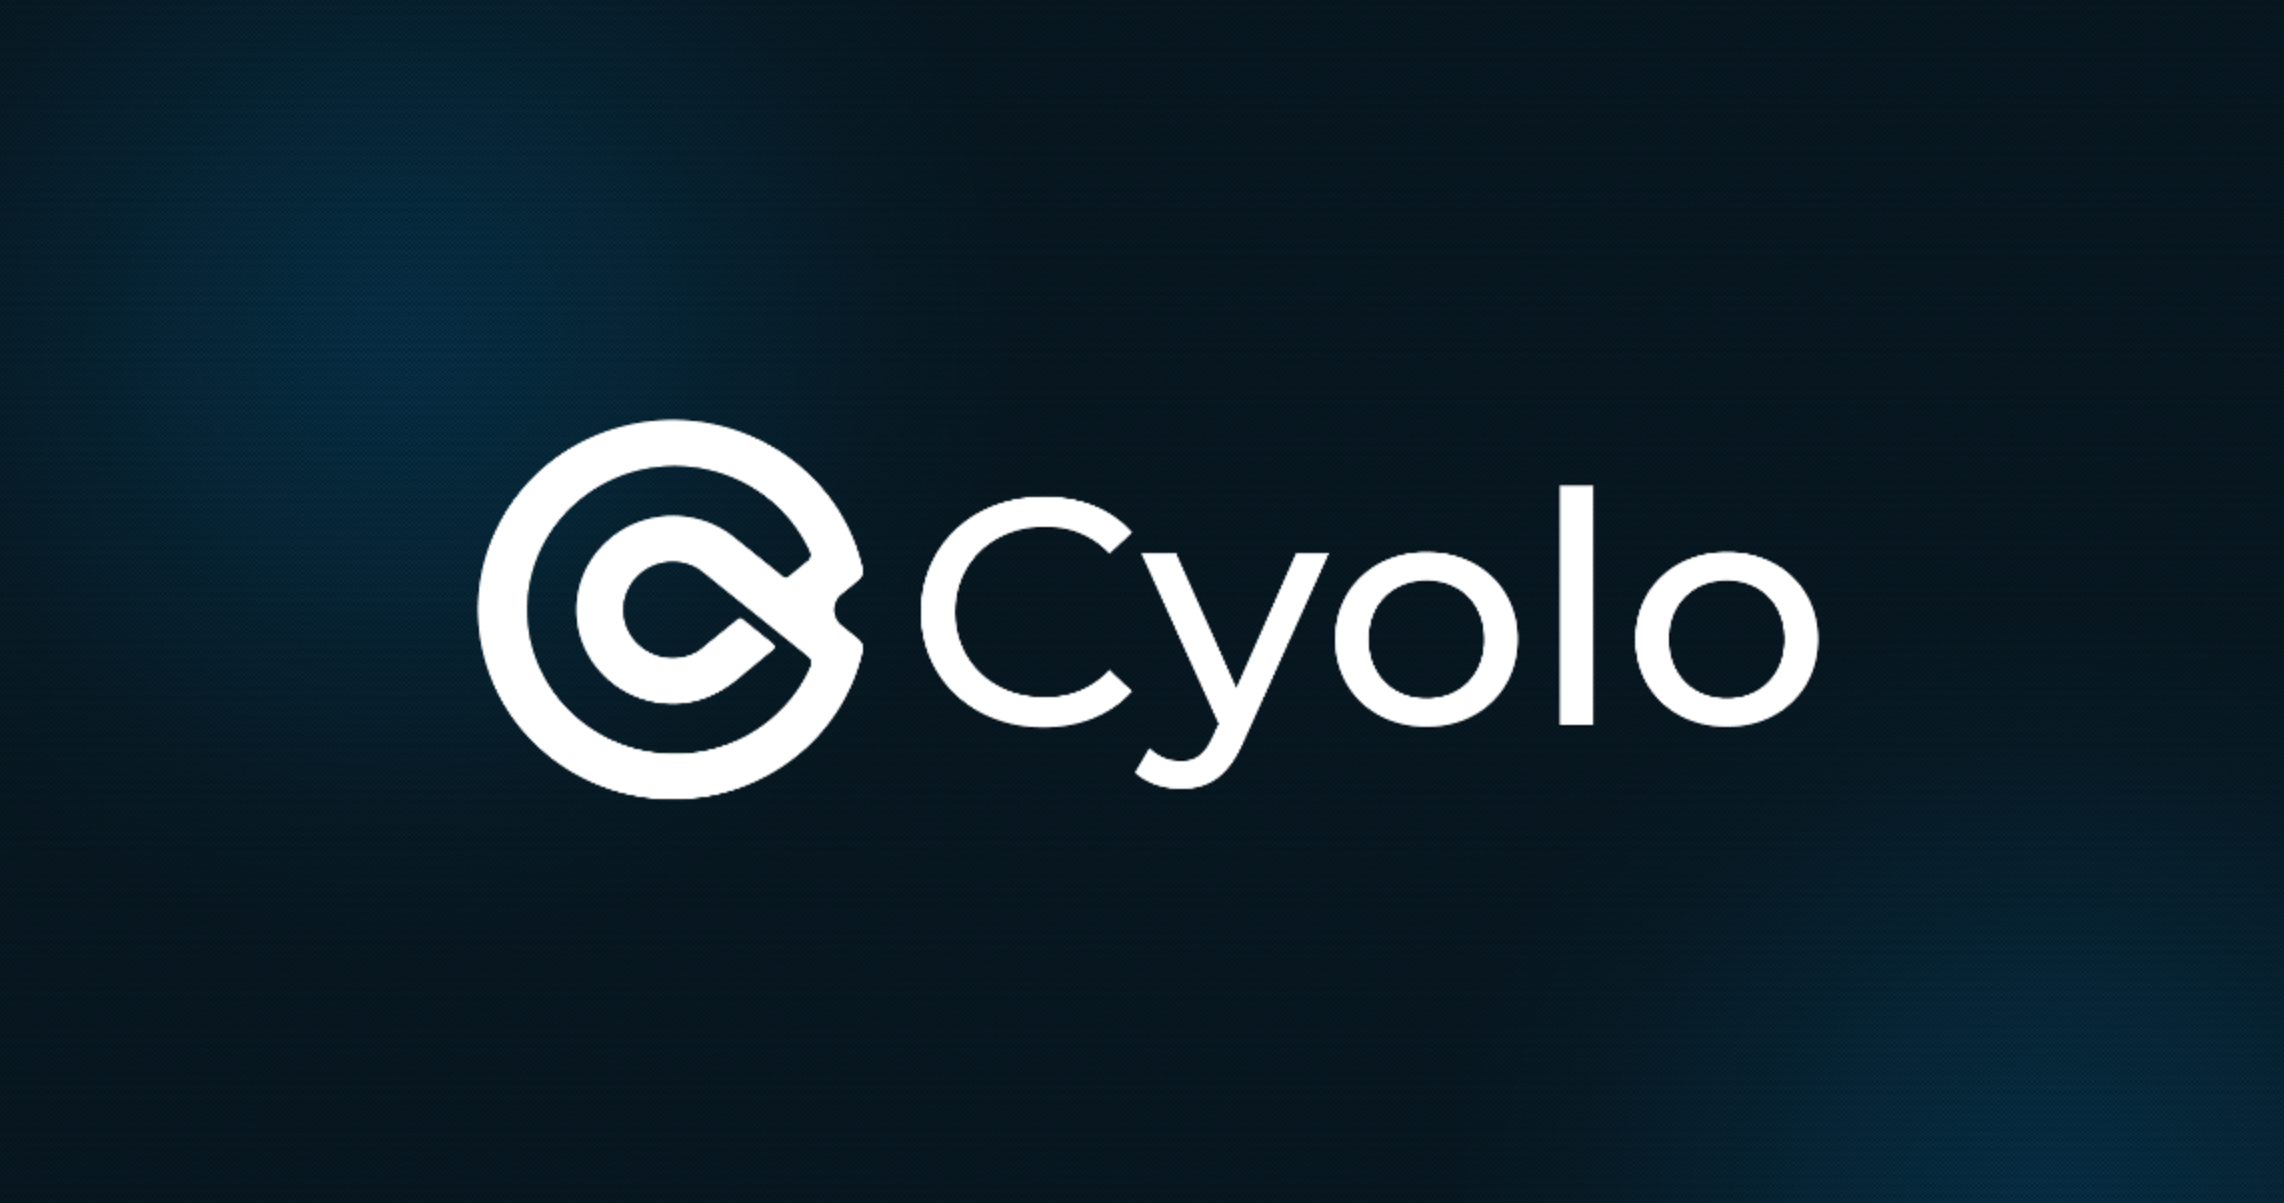 Addressing operational-technology security concerns, Cyolo announces new remote access solution